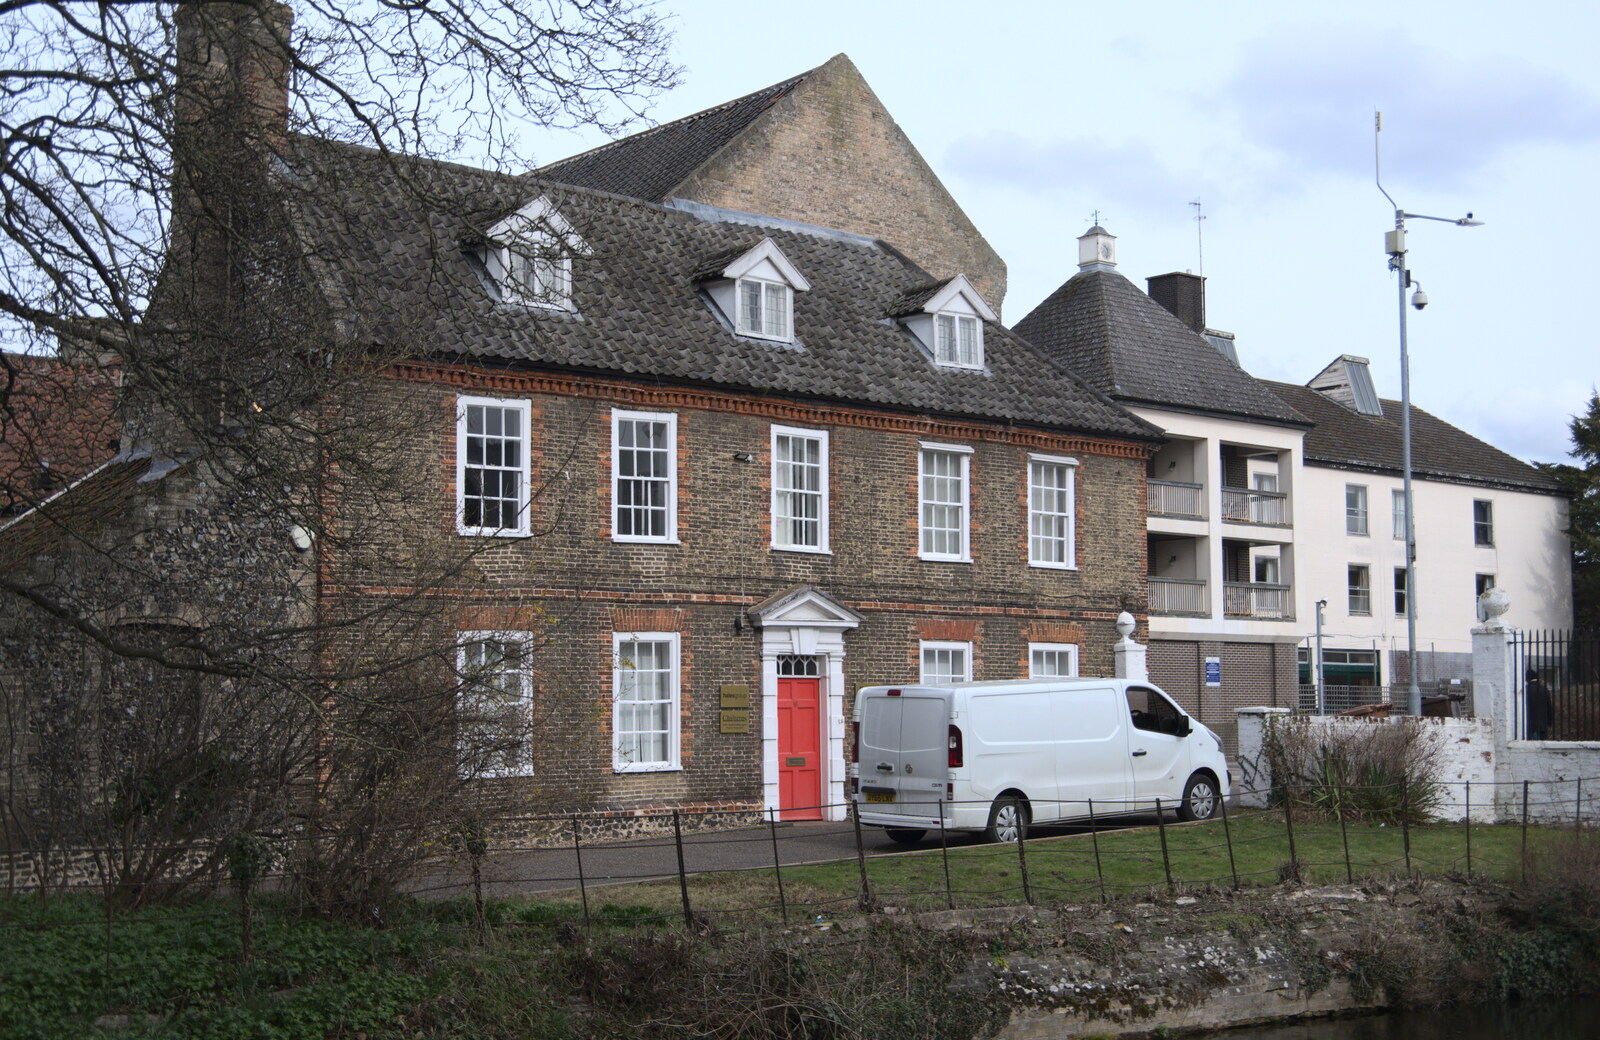 A nice building near the bridge from A Postcard from Thetford, Norfolk - 15th March 2023